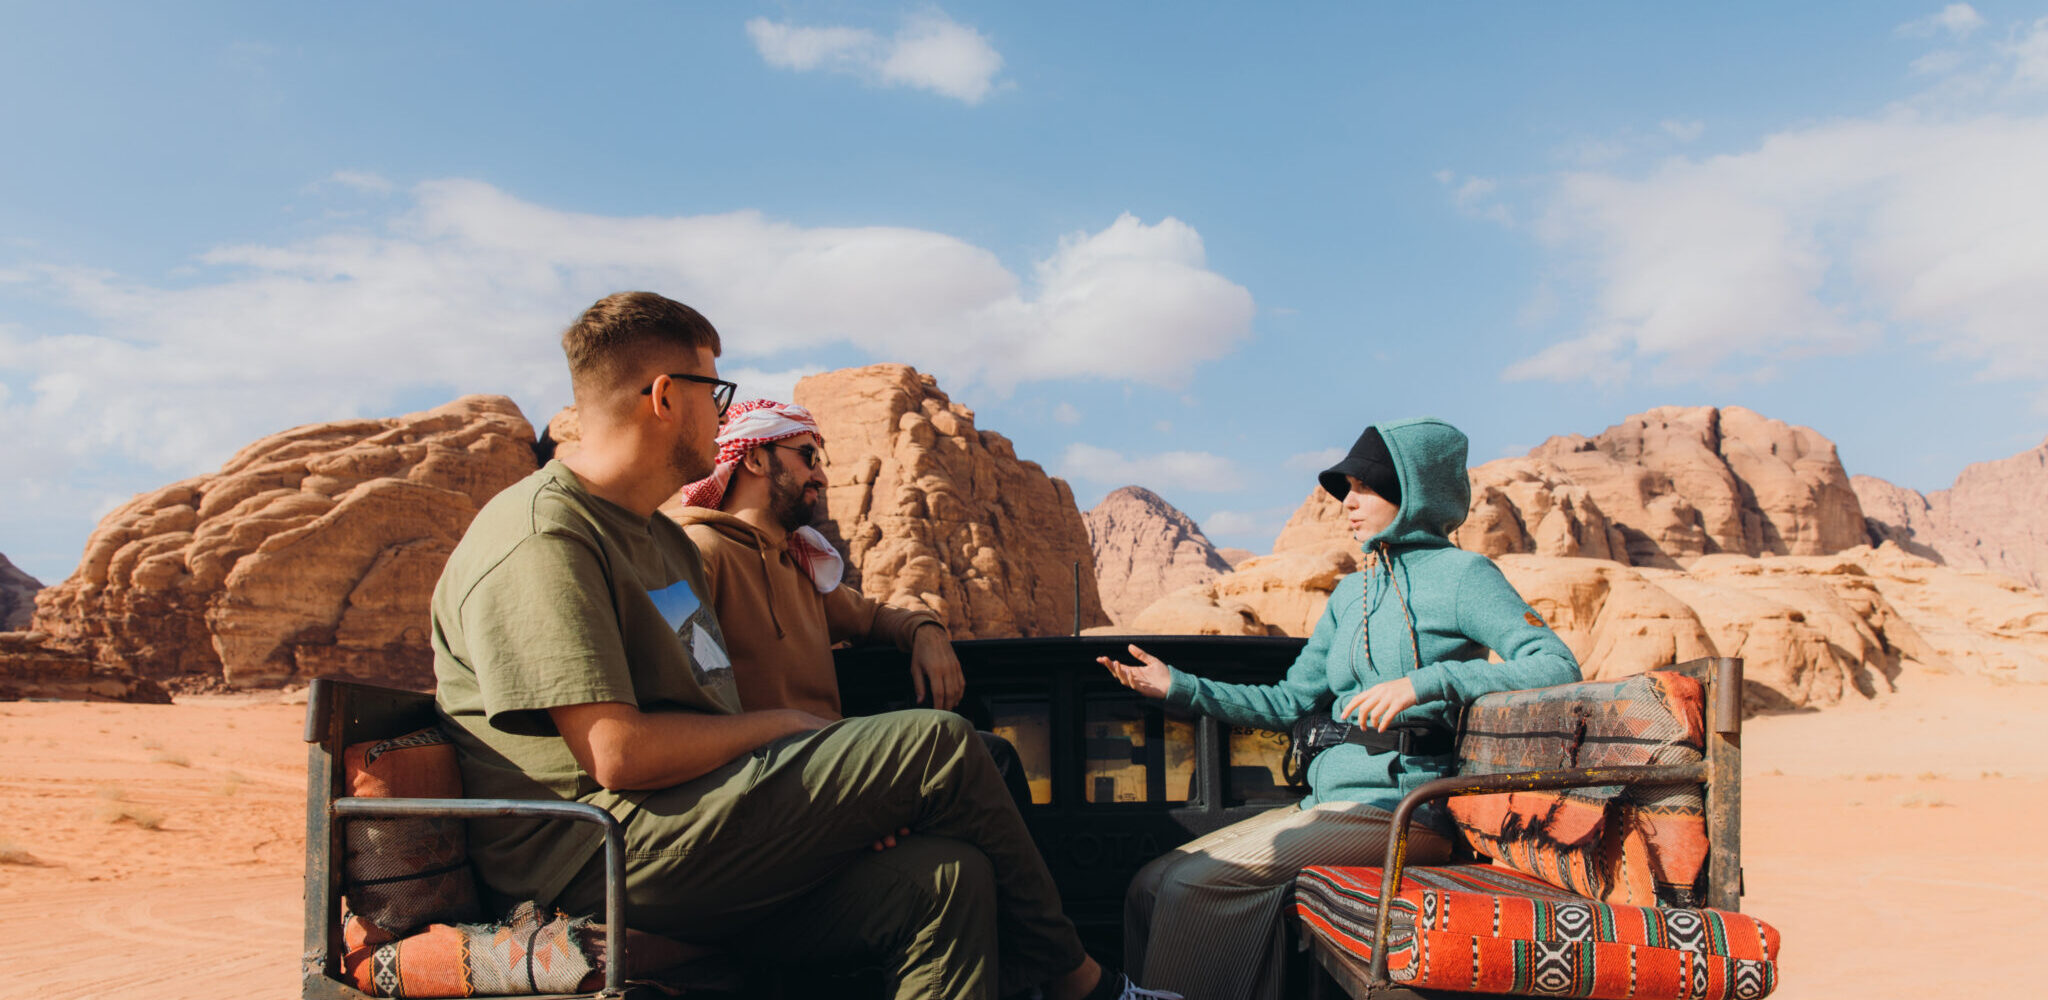 Happy two males and one female travelers enjoying a road trip by 4x4 vehicle  car at the red mountain desert in Jordan